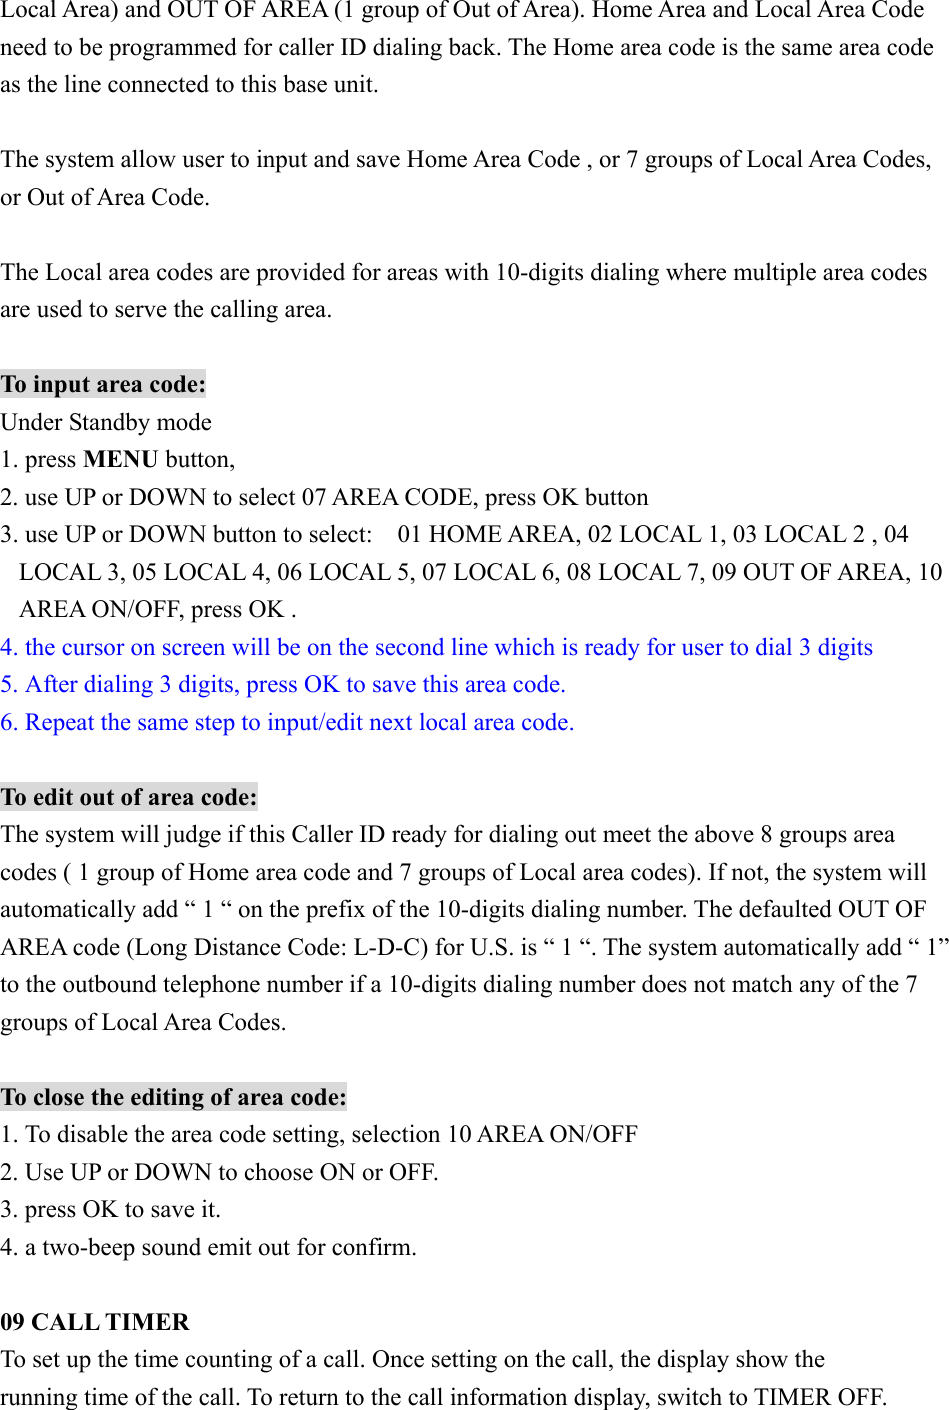 Local Area) and OUT OF AREA (1 group of Out of Area). Home Area and Local Area Code need to be programmed for caller ID dialing back. The Home area code is the same area code as the line connected to this base unit.    The system allow user to input and save Home Area Code , or 7 groups of Local Area Codes, or Out of Area Code.  The Local area codes are provided for areas with 10-digits dialing where multiple area codes are used to serve the calling area.    To input area code: Under Standby mode   1. press MENU button, 2. use UP or DOWN to select 07 AREA CODE, press OK button 3. use UP or DOWN button to select:    01 HOME AREA, 02 LOCAL 1, 03 LOCAL 2 , 04 LOCAL 3, 05 LOCAL 4, 06 LOCAL 5, 07 LOCAL 6, 08 LOCAL 7, 09 OUT OF AREA, 10 AREA ON/OFF, press OK . 4. the cursor on screen will be on the second line which is ready for user to dial 3 digits 5. After dialing 3 digits, press OK to save this area code. 6. Repeat the same step to input/edit next local area code.  To edit out of area code: The system will judge if this Caller ID ready for dialing out meet the above 8 groups area codes ( 1 group of Home area code and 7 groups of Local area codes). If not, the system will automatically add “ 1 “ on the prefix of the 10-digits dialing number. The defaulted OUT OF AREA code (Long Distance Code: L-D-C) for U.S. is “ 1 “. The system automatically add “ 1” to the outbound telephone number if a 10-digits dialing number does not match any of the 7 groups of Local Area Codes.  To close the editing of area code: 1. To disable the area code setting, selection 10 AREA ON/OFF 2. Use UP or DOWN to choose ON or OFF. 3. press OK to save it. 4. a two-beep sound emit out for confirm.  09 CALL TIMER To set up the time counting of a call. Once setting on the call, the display show the running time of the call. To return to the call information display, switch to TIMER OFF. 